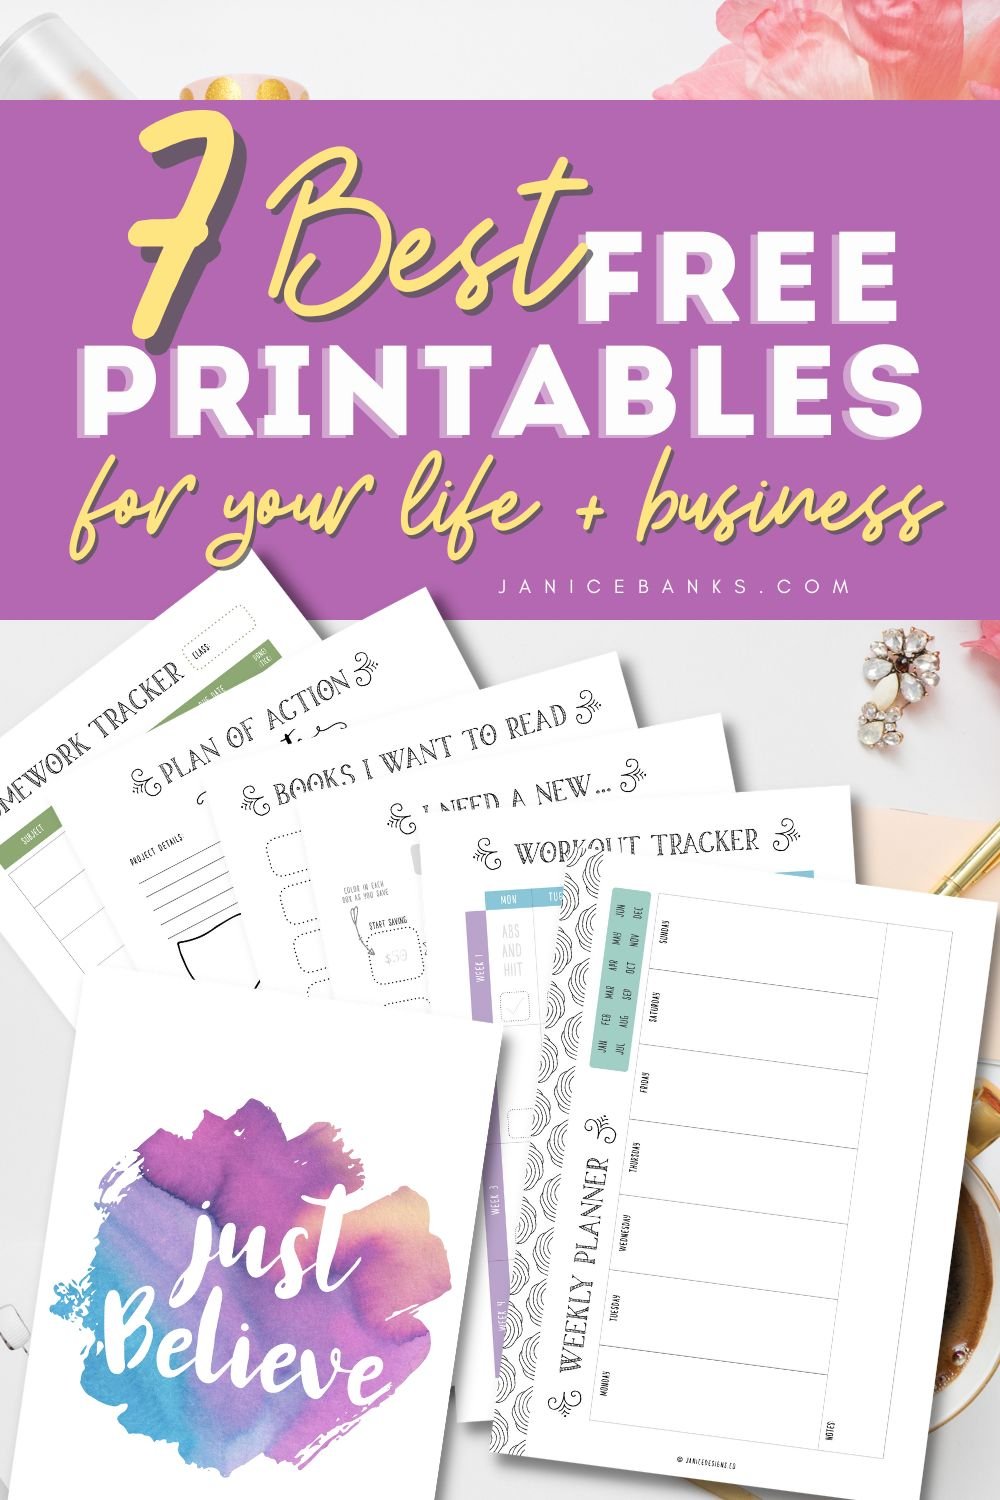 7 Best Free Printables for Your Life and Business